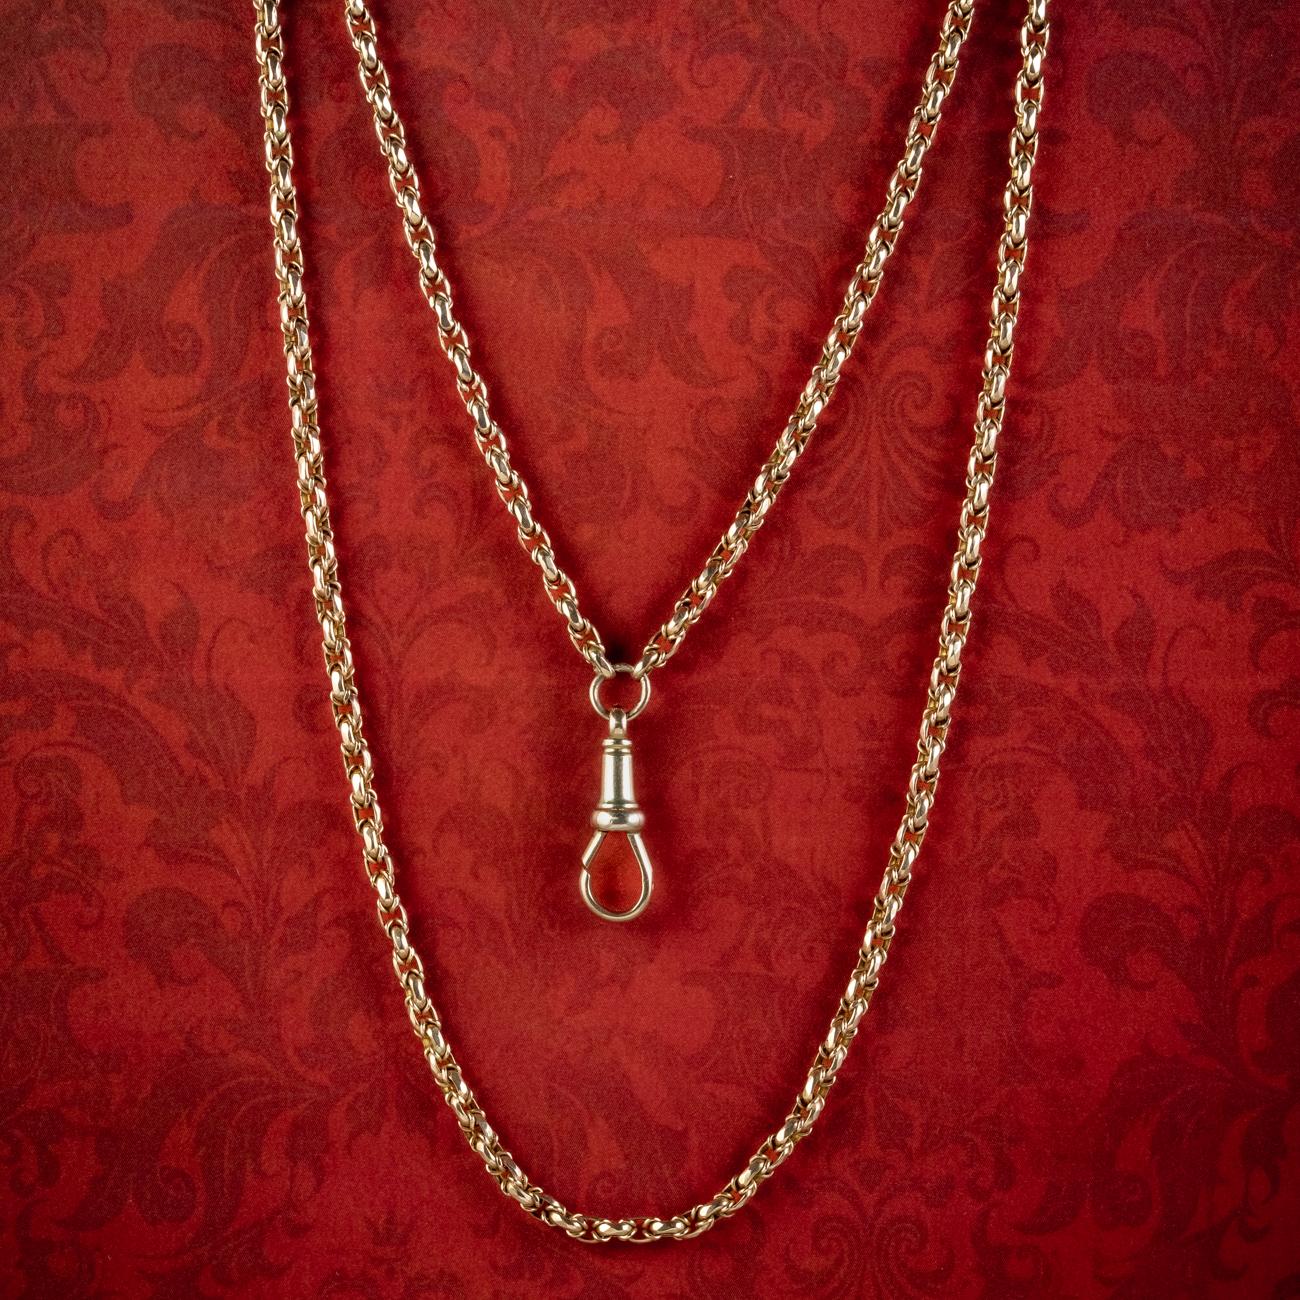 A grand antique Victorian guard chain from the late 19th Century made up of beautiful, faceted cable links crafted in 9ct gold, with a claw clasp hung at the bottom.  

Guard chains were at the height of popularity in the 18th & 19th Century. Both